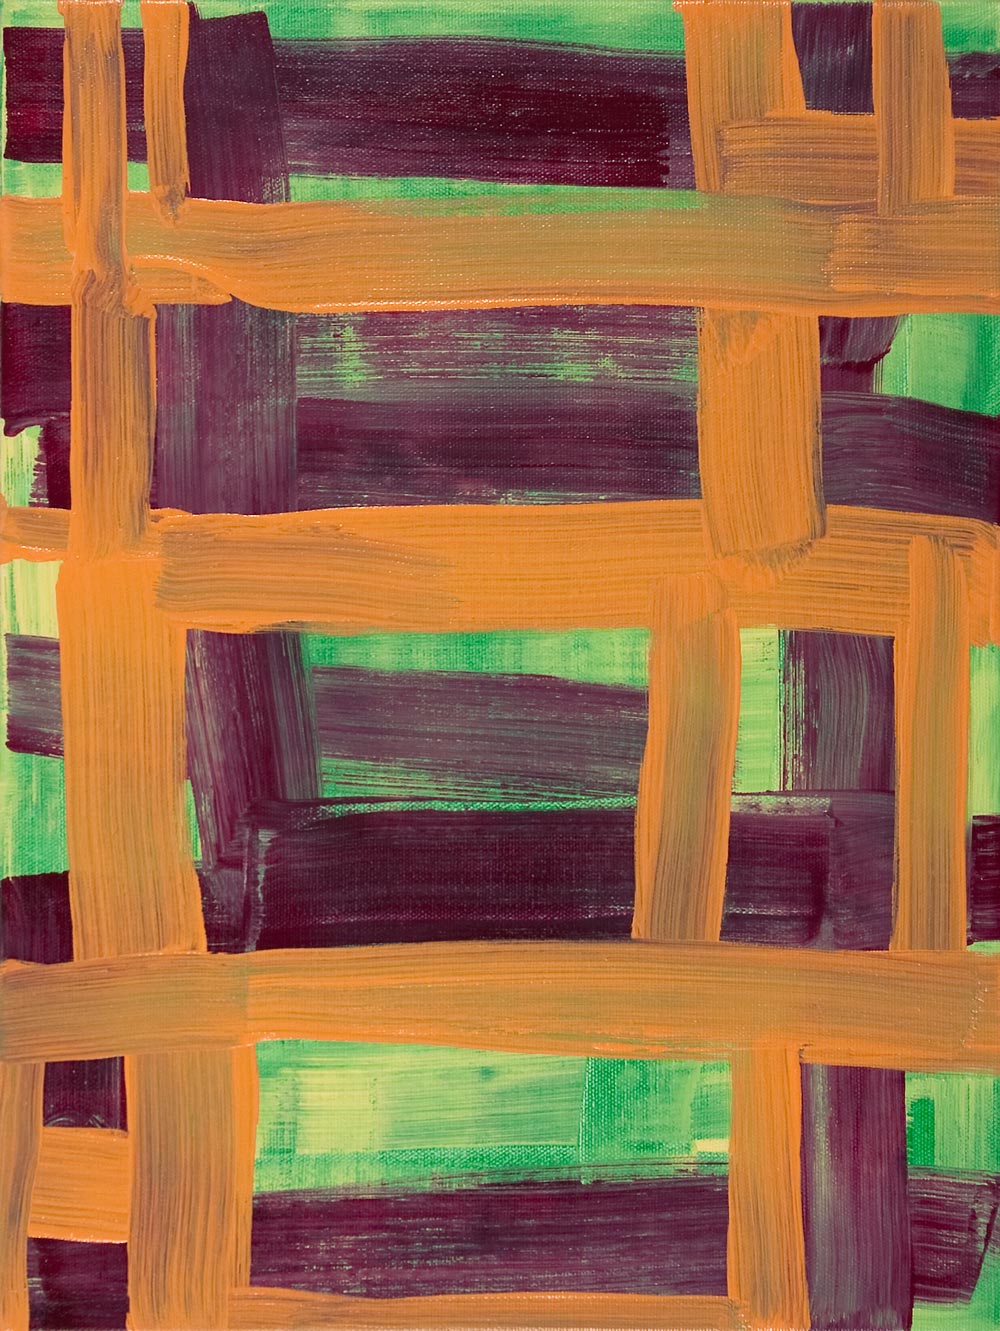   Cubic , 2010 oil on canvas 16 x 12 in.  private collection  